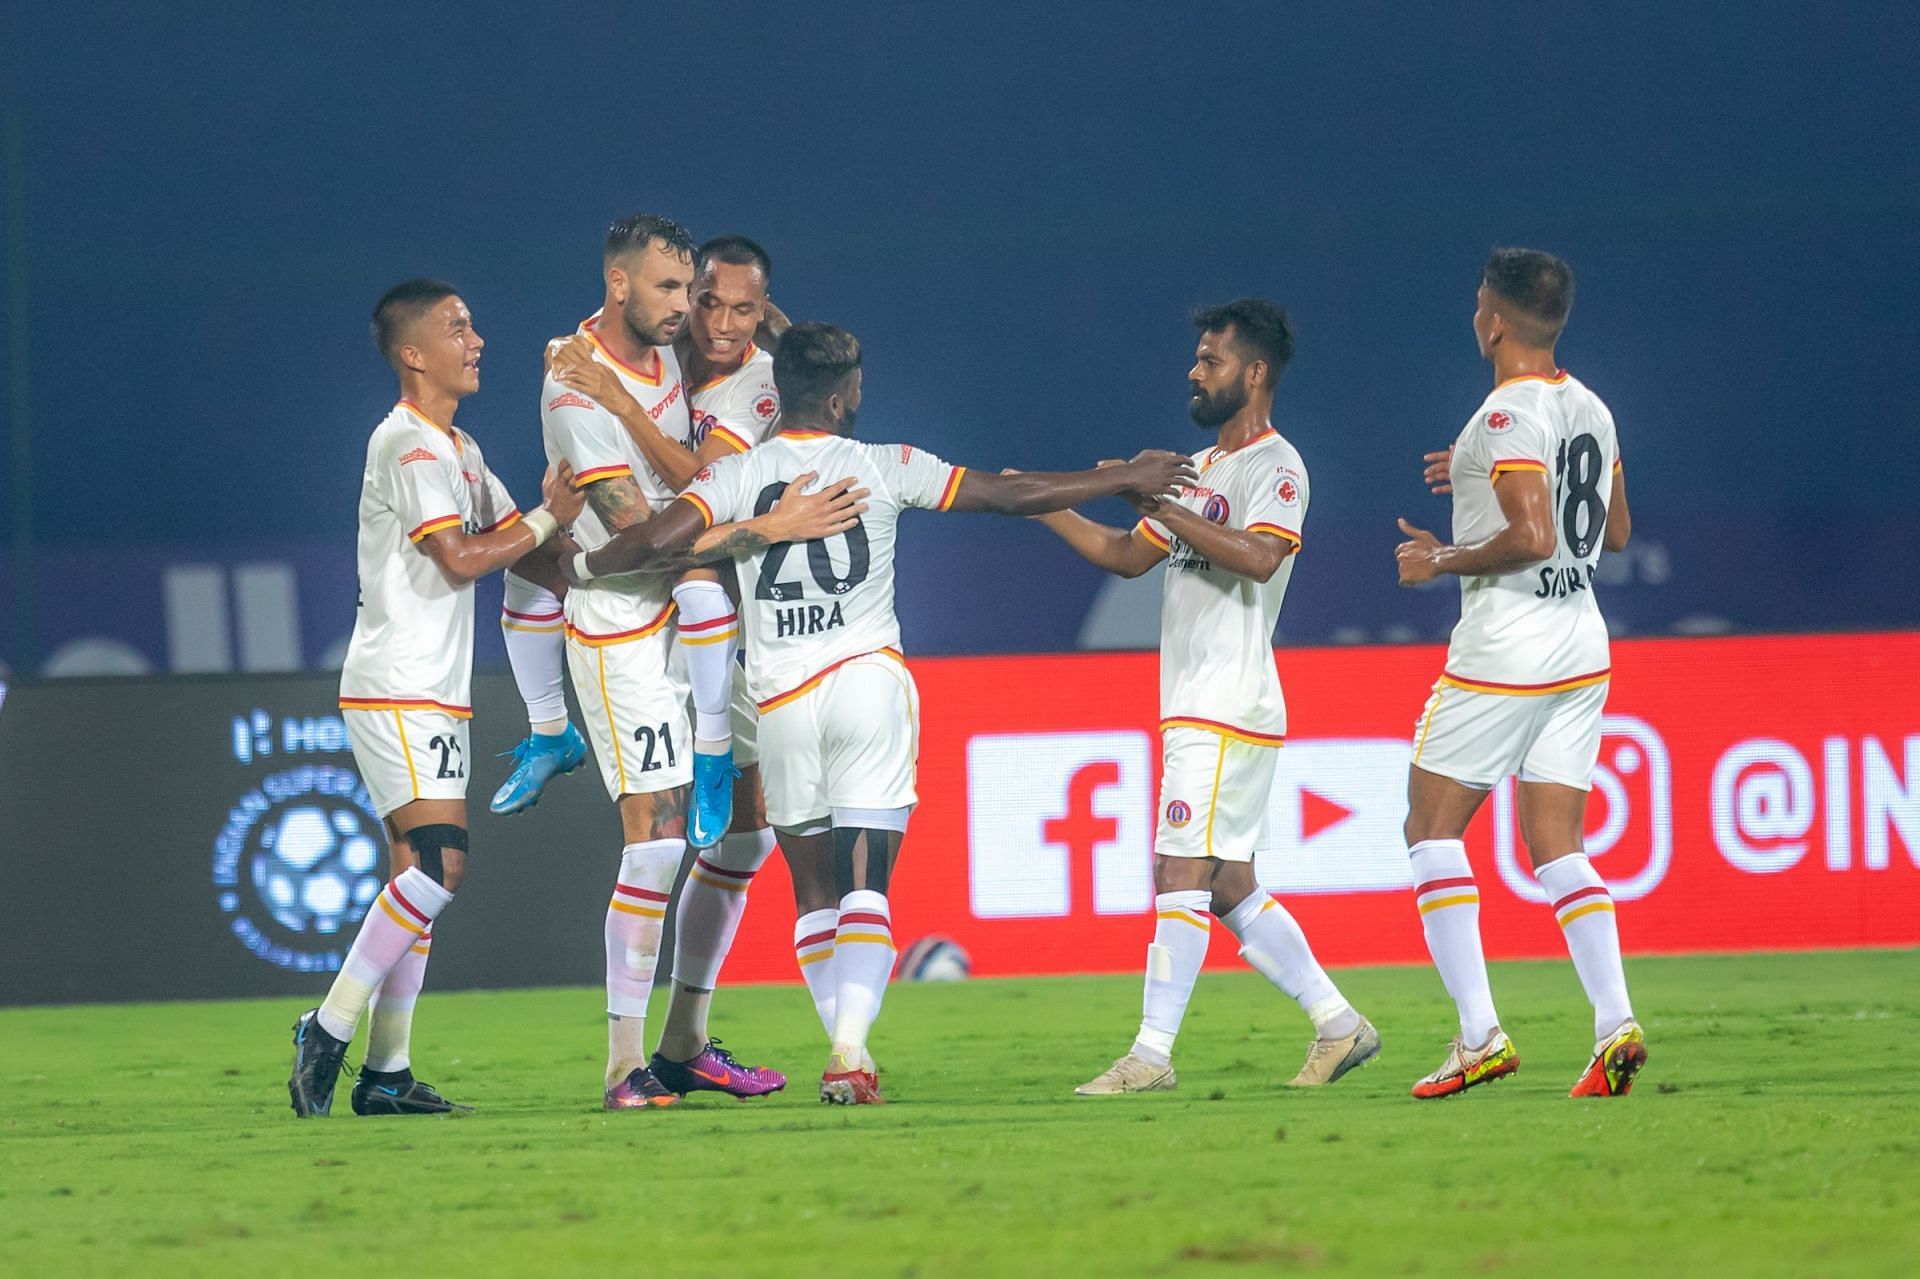 SC East Bengal players celebrate after Amir Dervisevic scores a goal against Hyderabad FC. (Image Courtesy: ISL Media)